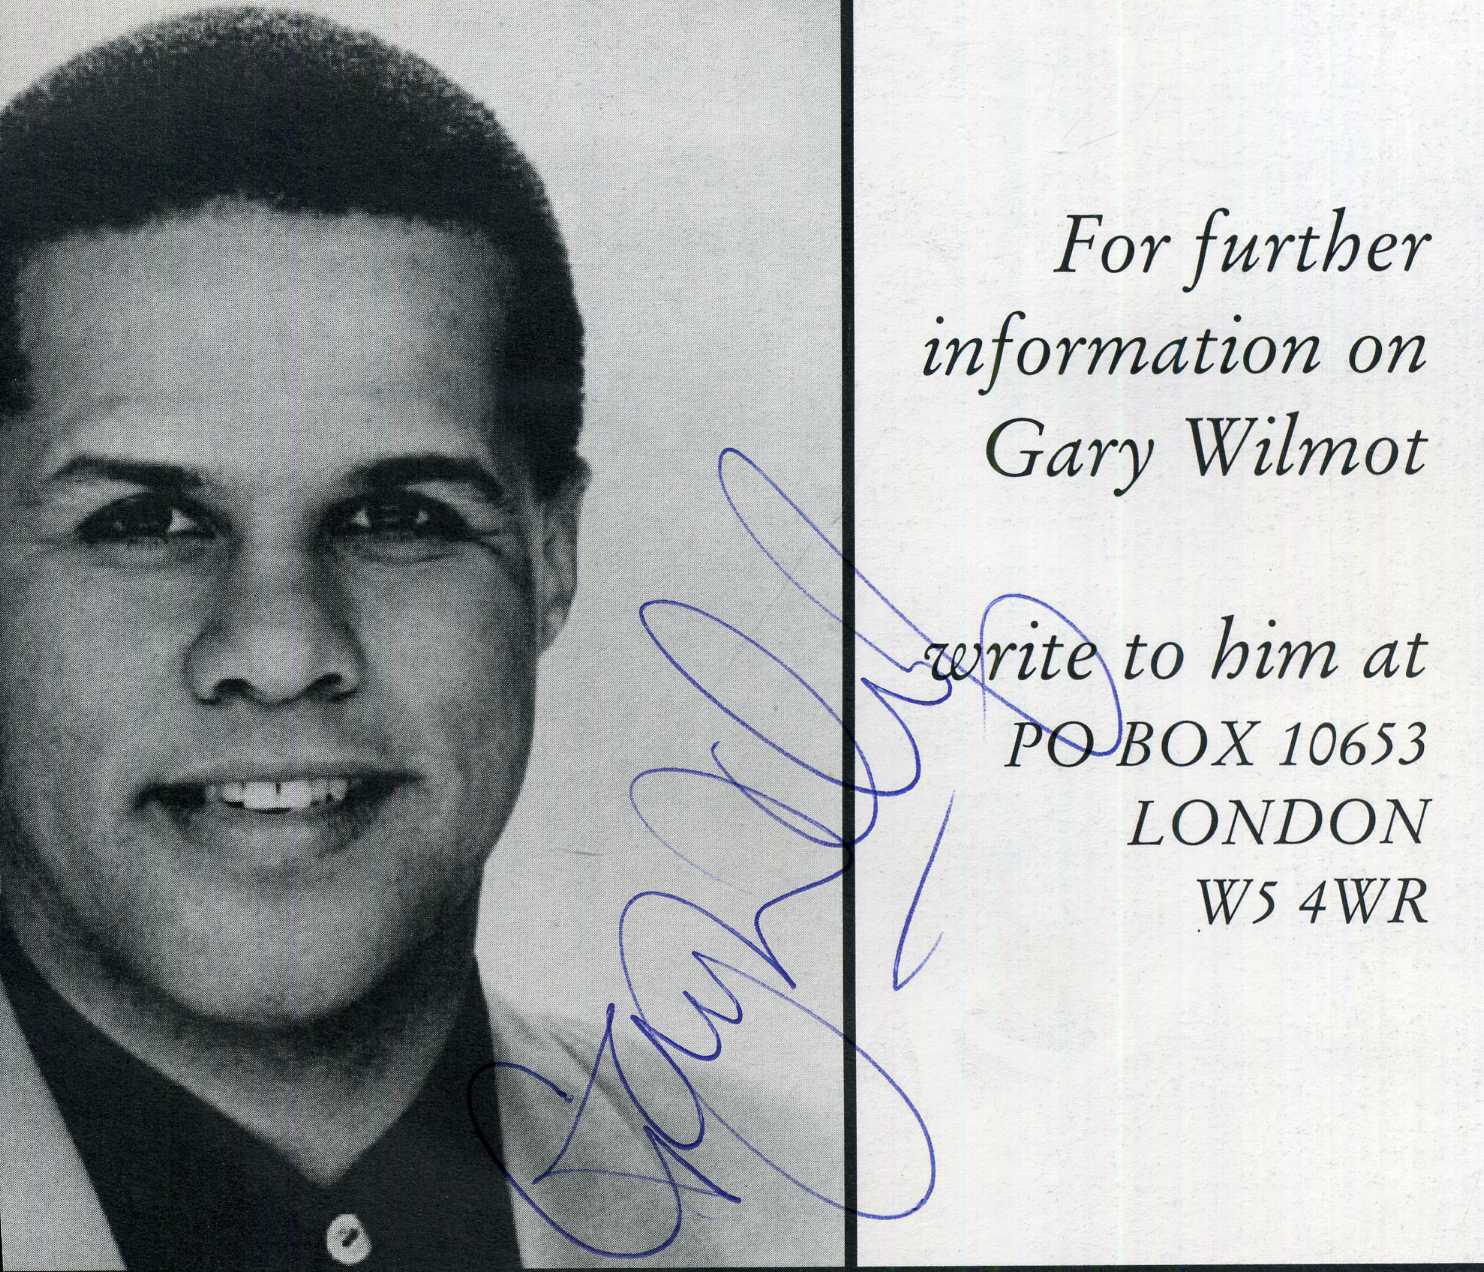 GARY WILMOT Signed Photo Poster paintinggraph - Actor / Singer / Comedian - preprint